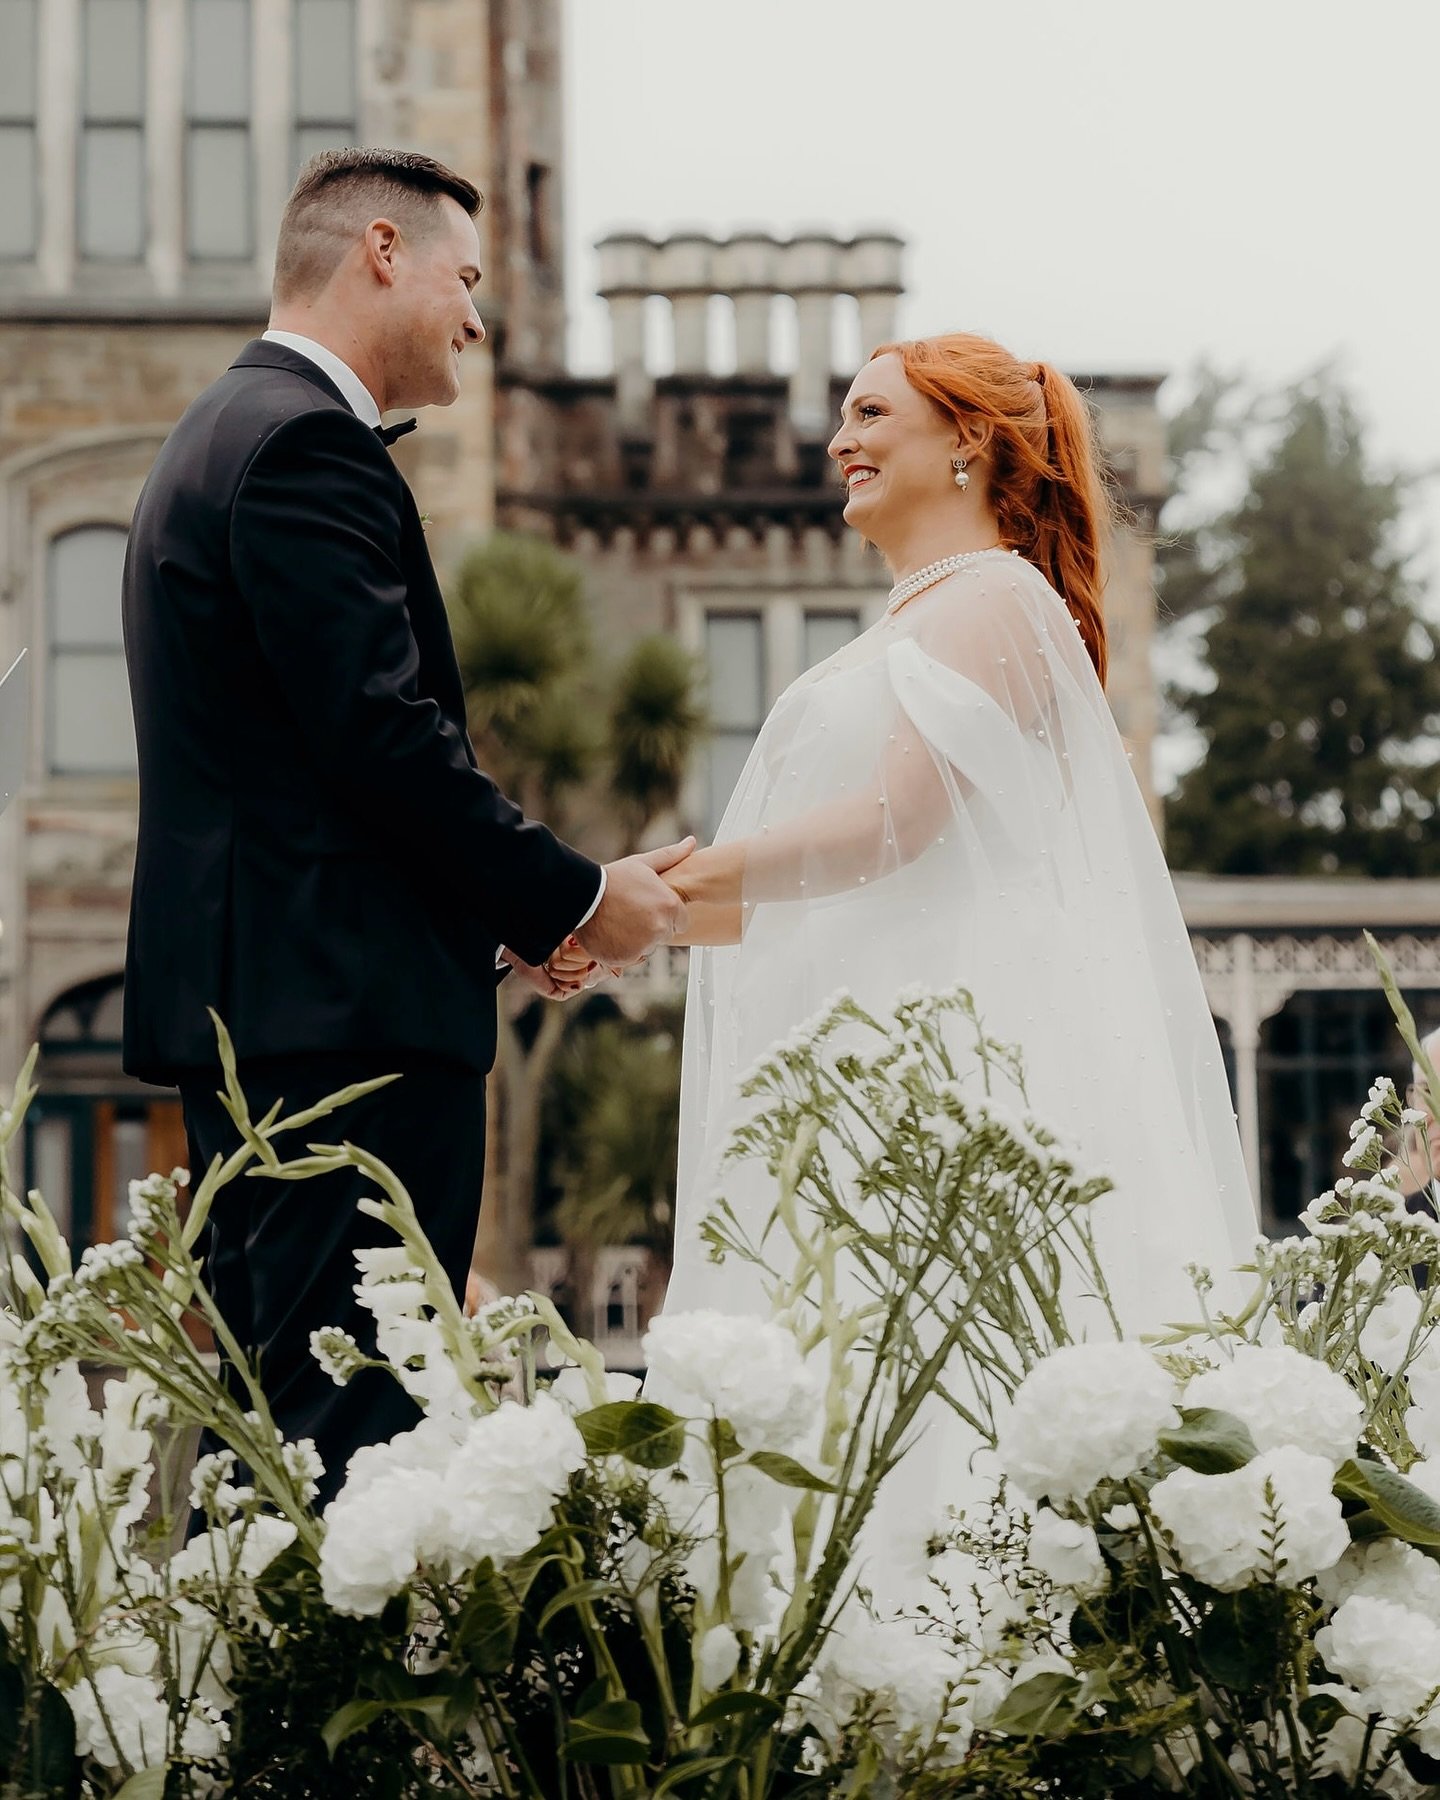 REAL LOVE // NEW WEDDING FEATURE 🏰 Larnach Castle was the inspiration behind Anna &amp; Peter&rsquo;s elegant wedding day, with a classic black &amp; white theme and copious amounts of flowers, crystal and Champagne! It was a true fairytale for the 